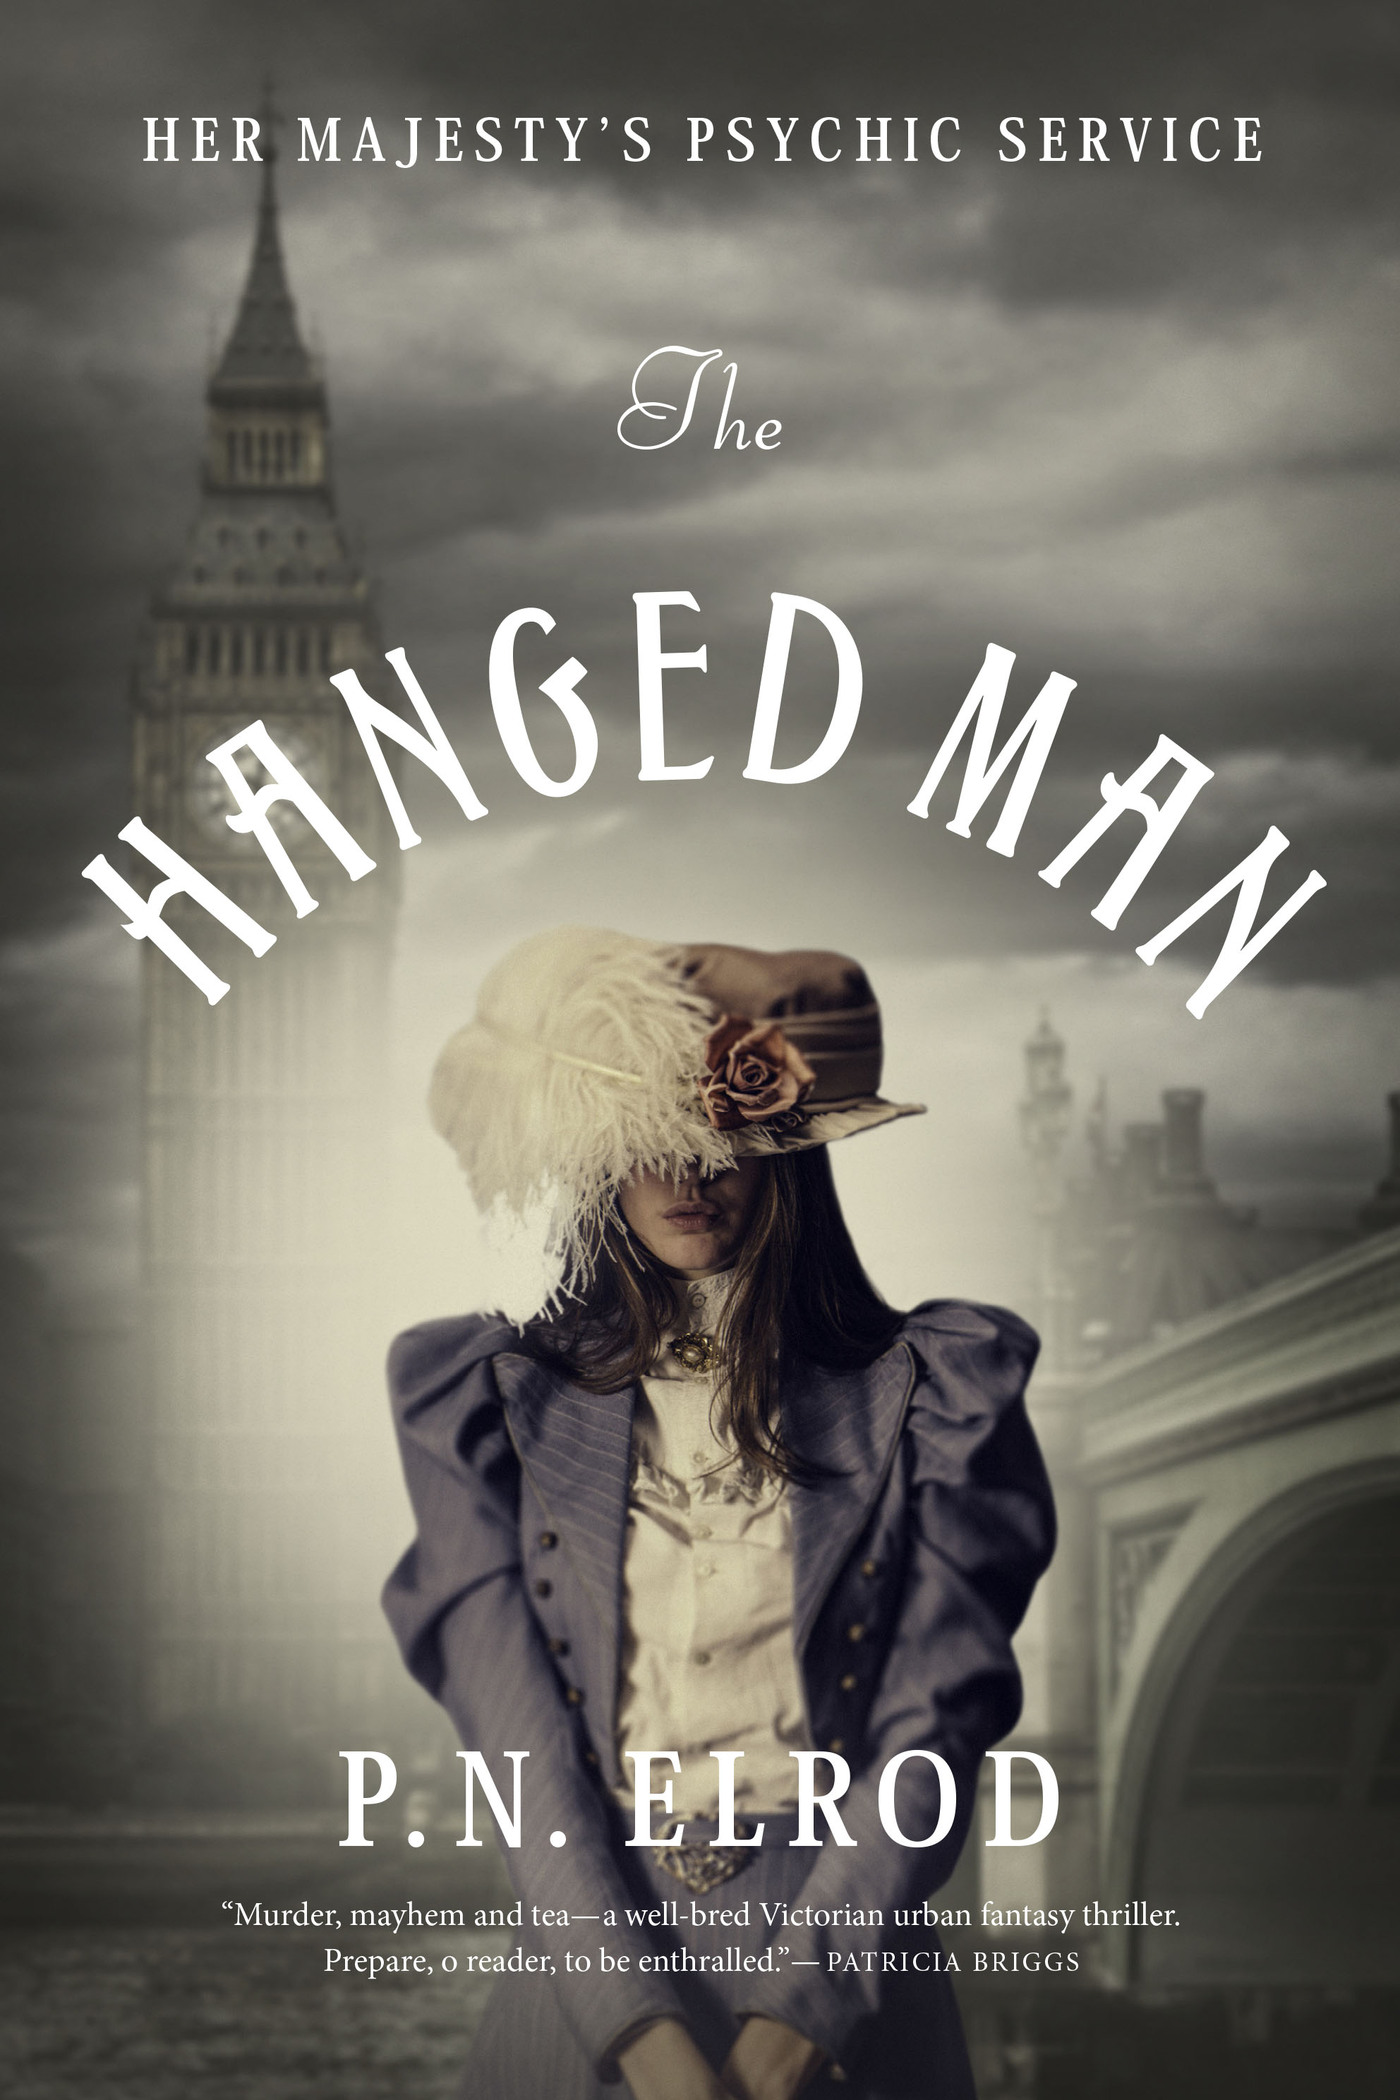 The Hanged Man by P. N. Elrod